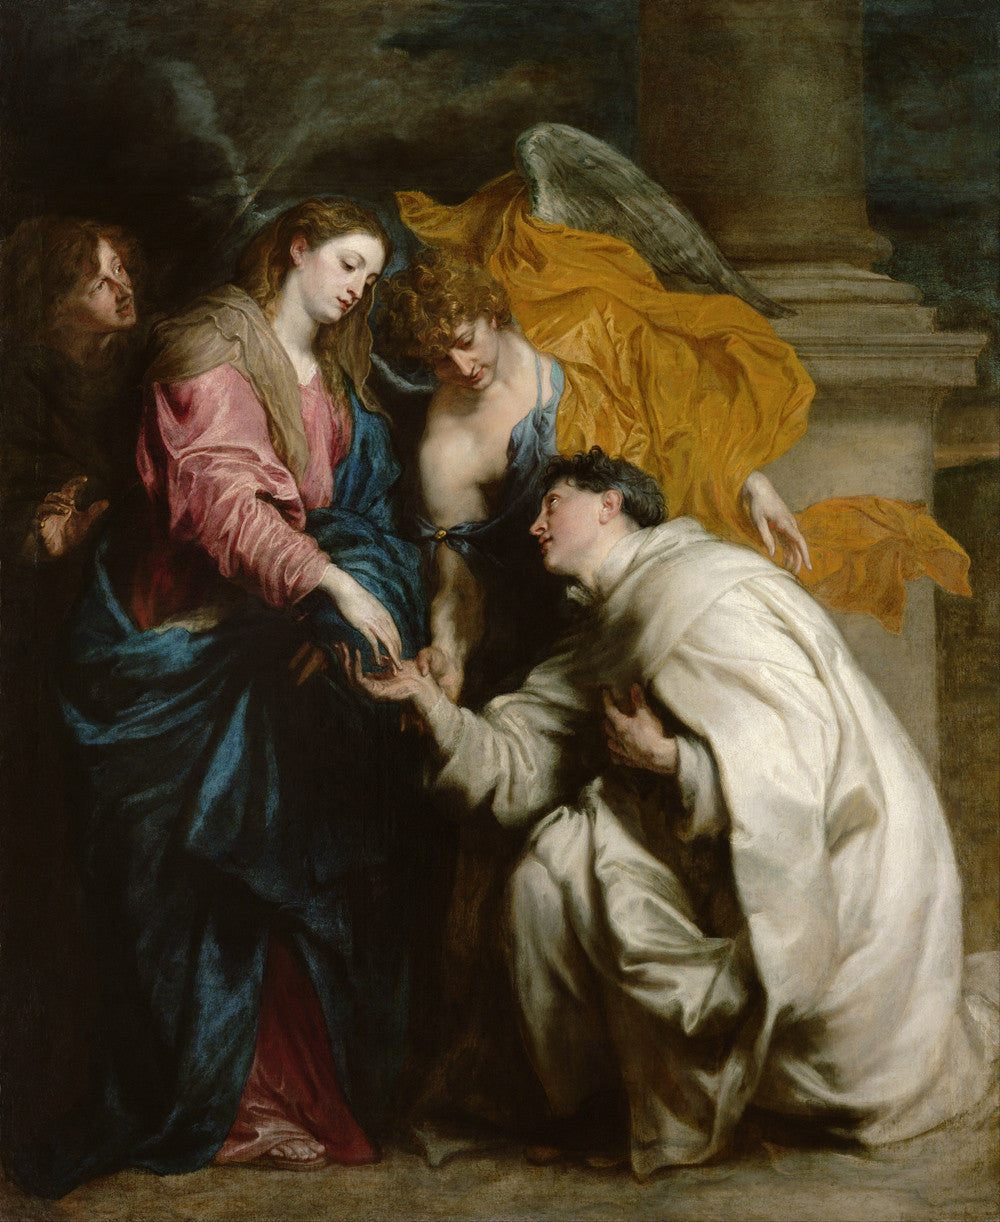 Sir Anthony van Dyck - The Vision of the Blessed Hermann Joseph